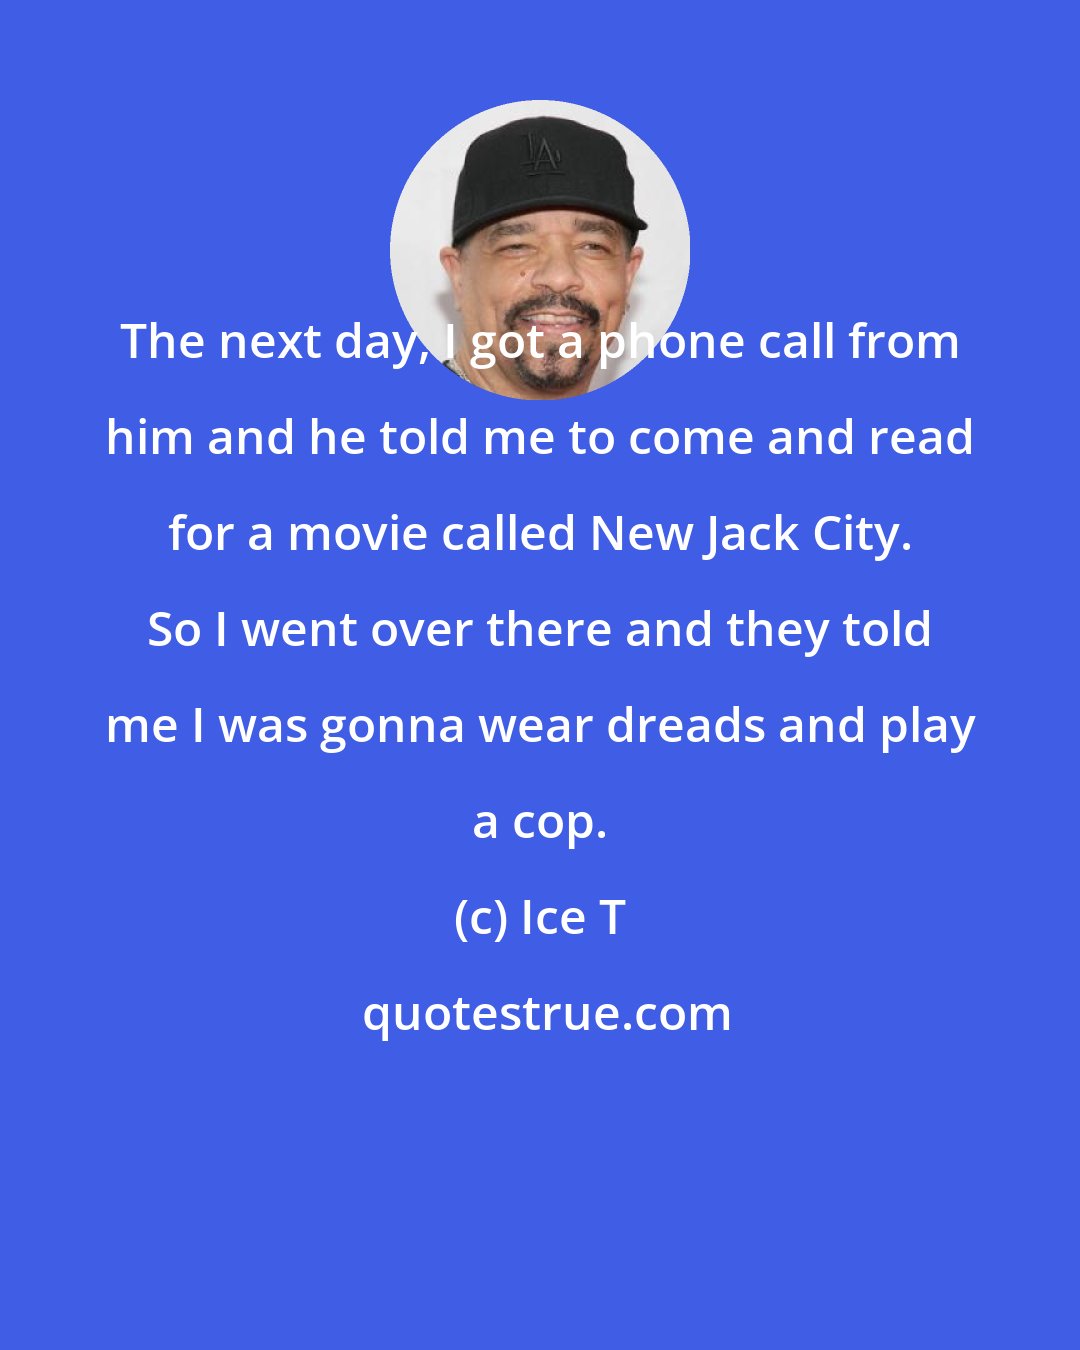 Ice T: The next day, I got a phone call from him and he told me to come and read for a movie called New Jack City. So I went over there and they told me I was gonna wear dreads and play a cop.